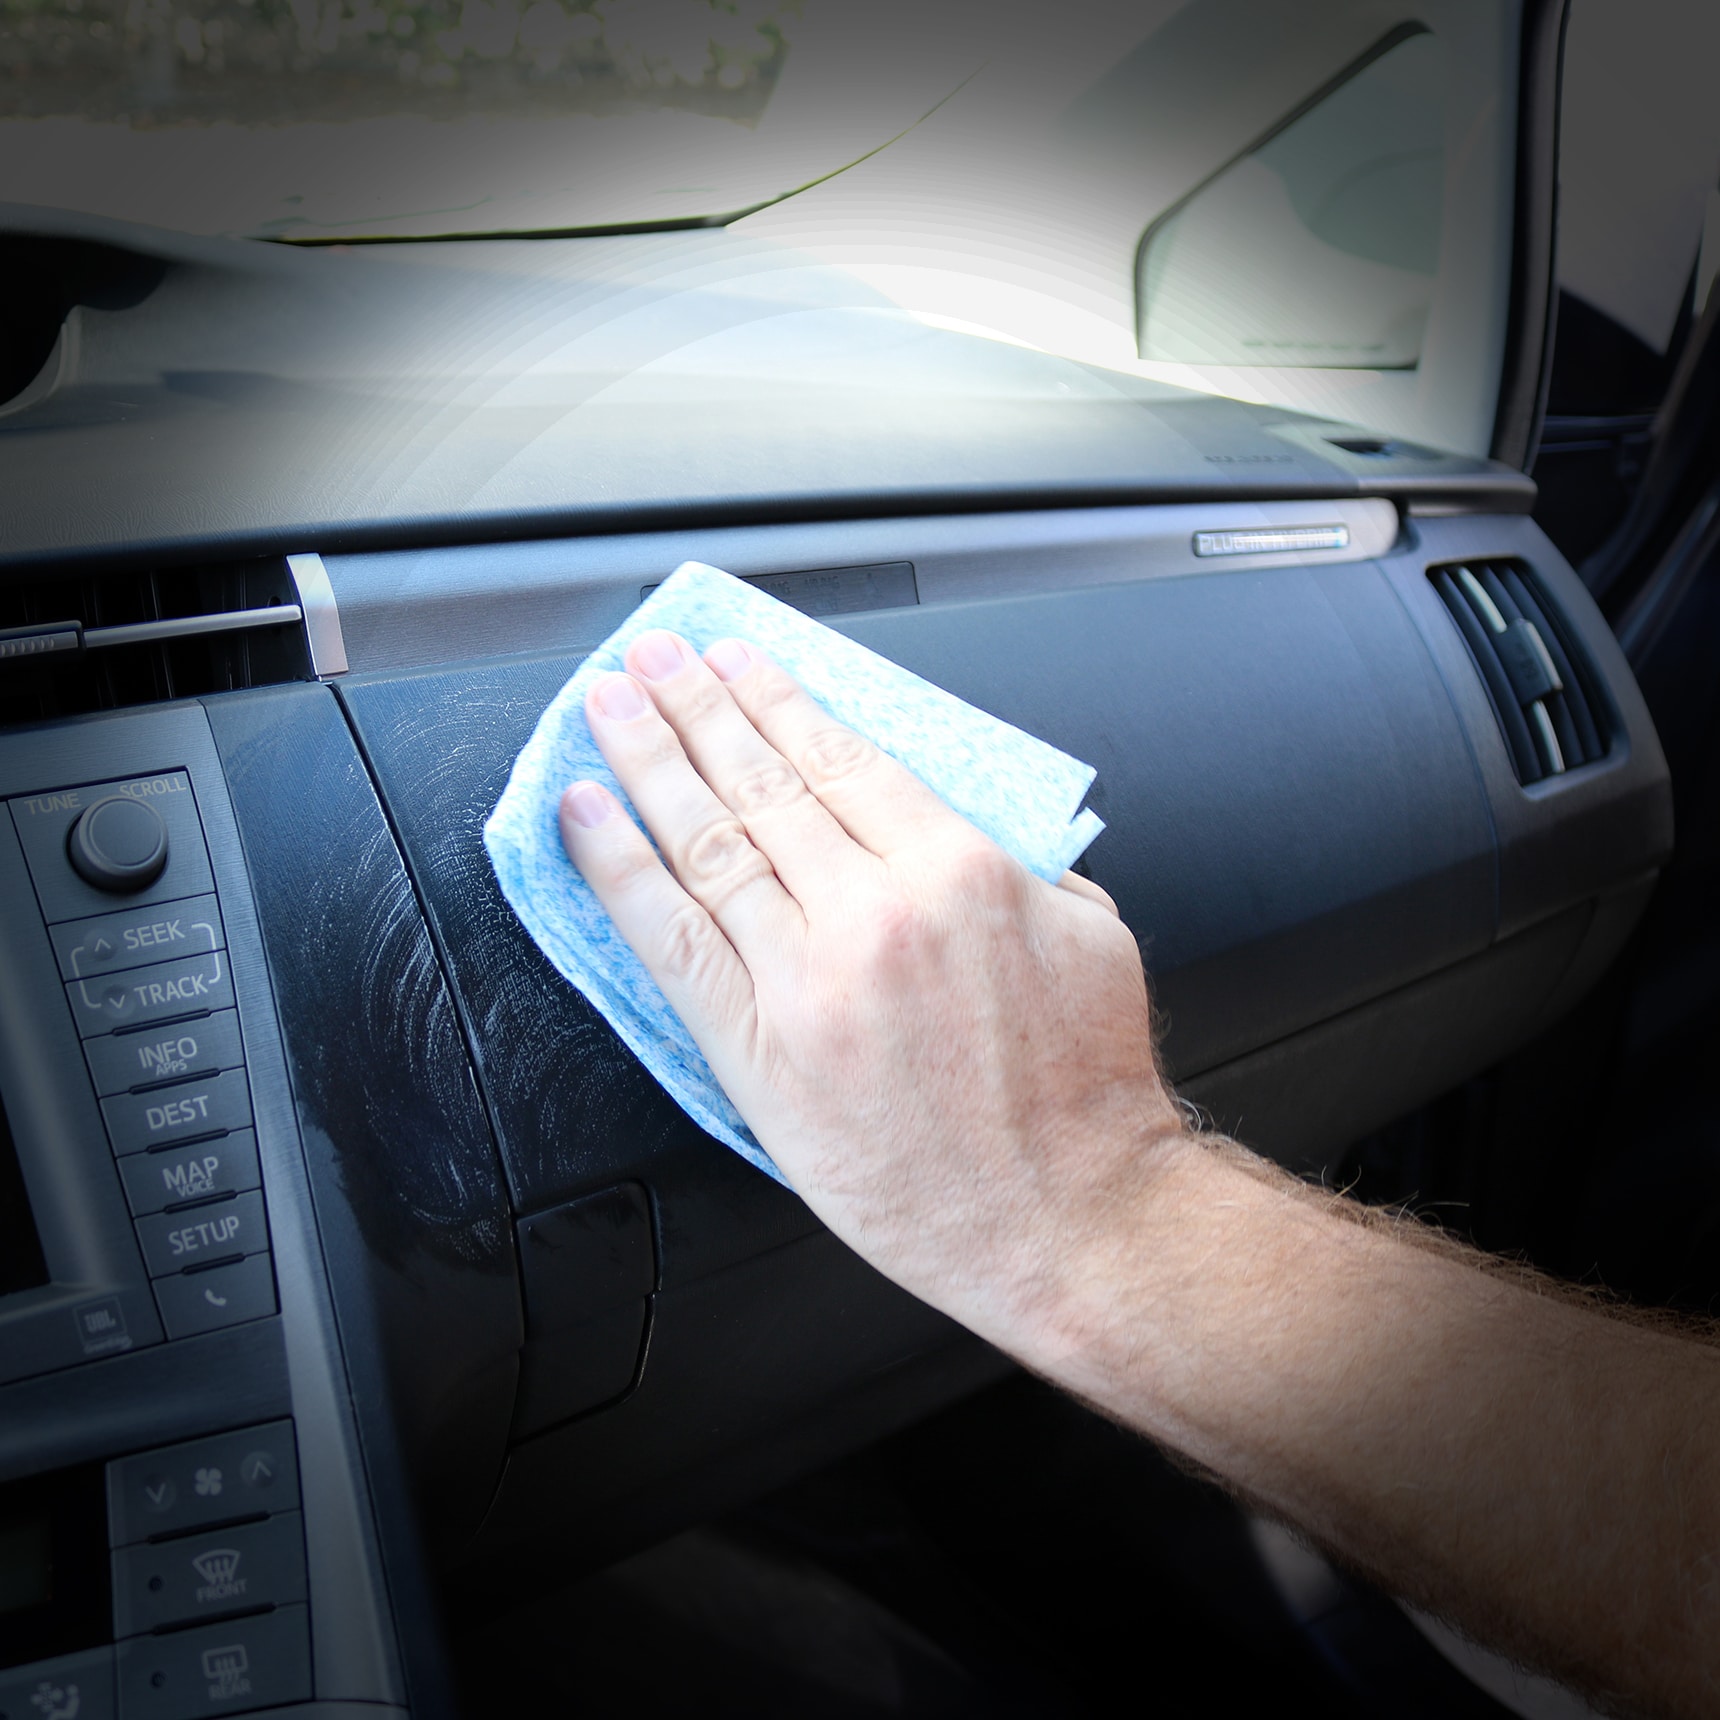 TrexNYC Glass Wipes - Interior Car Wipes, All-in-One Car Interior Cleaner